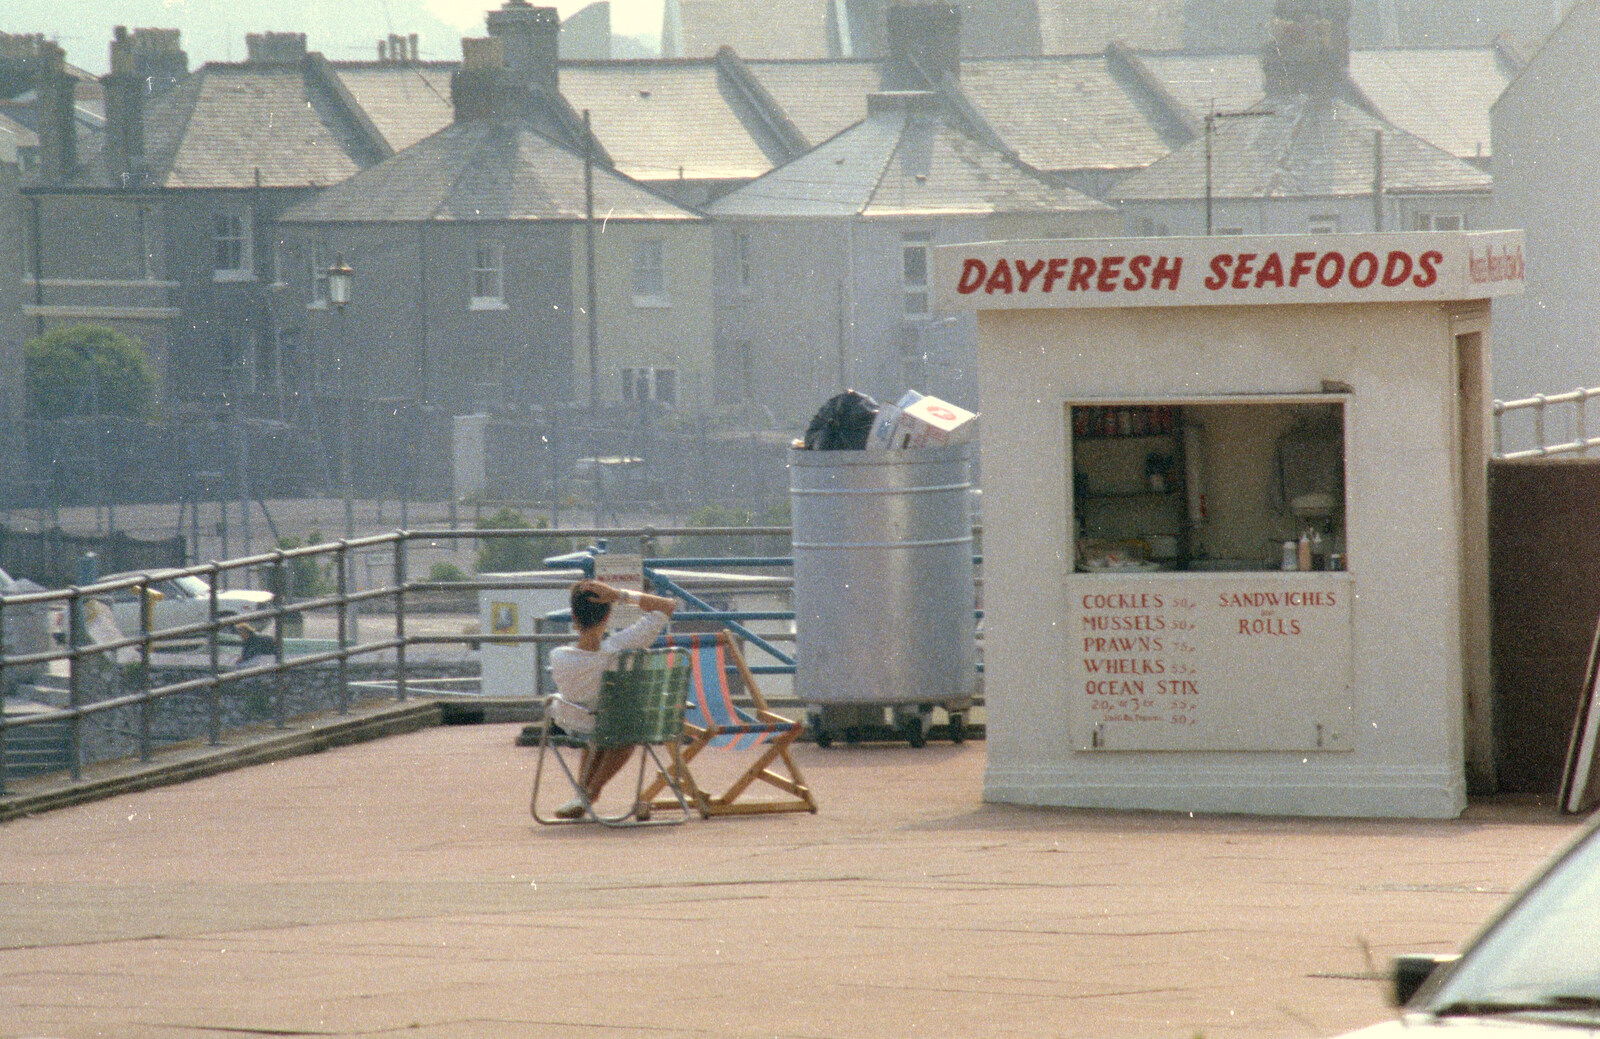 A woman waits outside Dayfresh Seafoods from Uni: Phil and Anna Visit Nosher, Plymouth, Devon - 18th May 1986